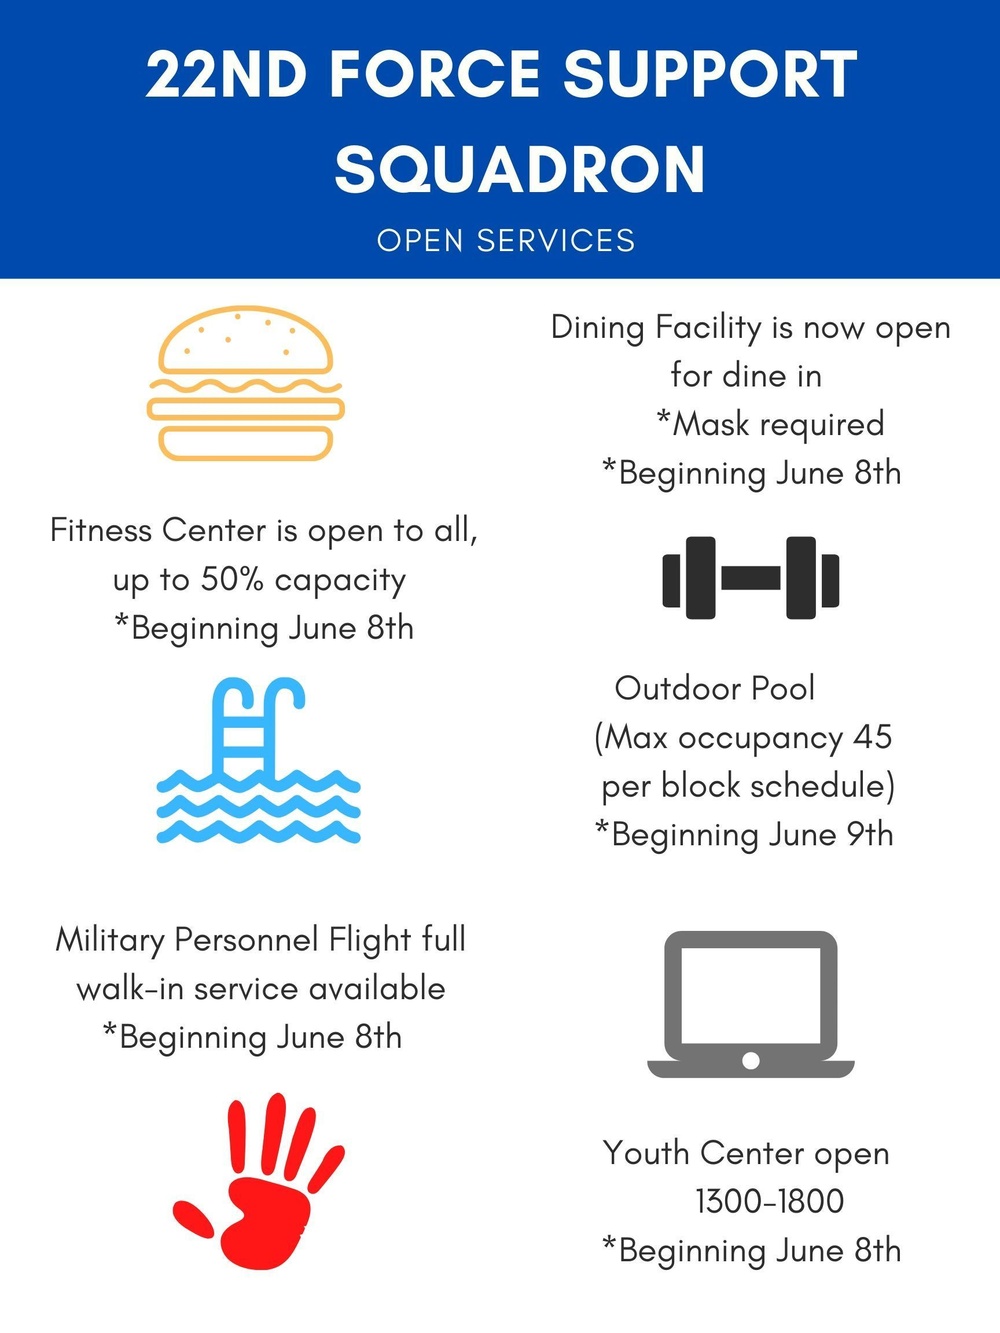 22nd Force Support Squadron Open Services